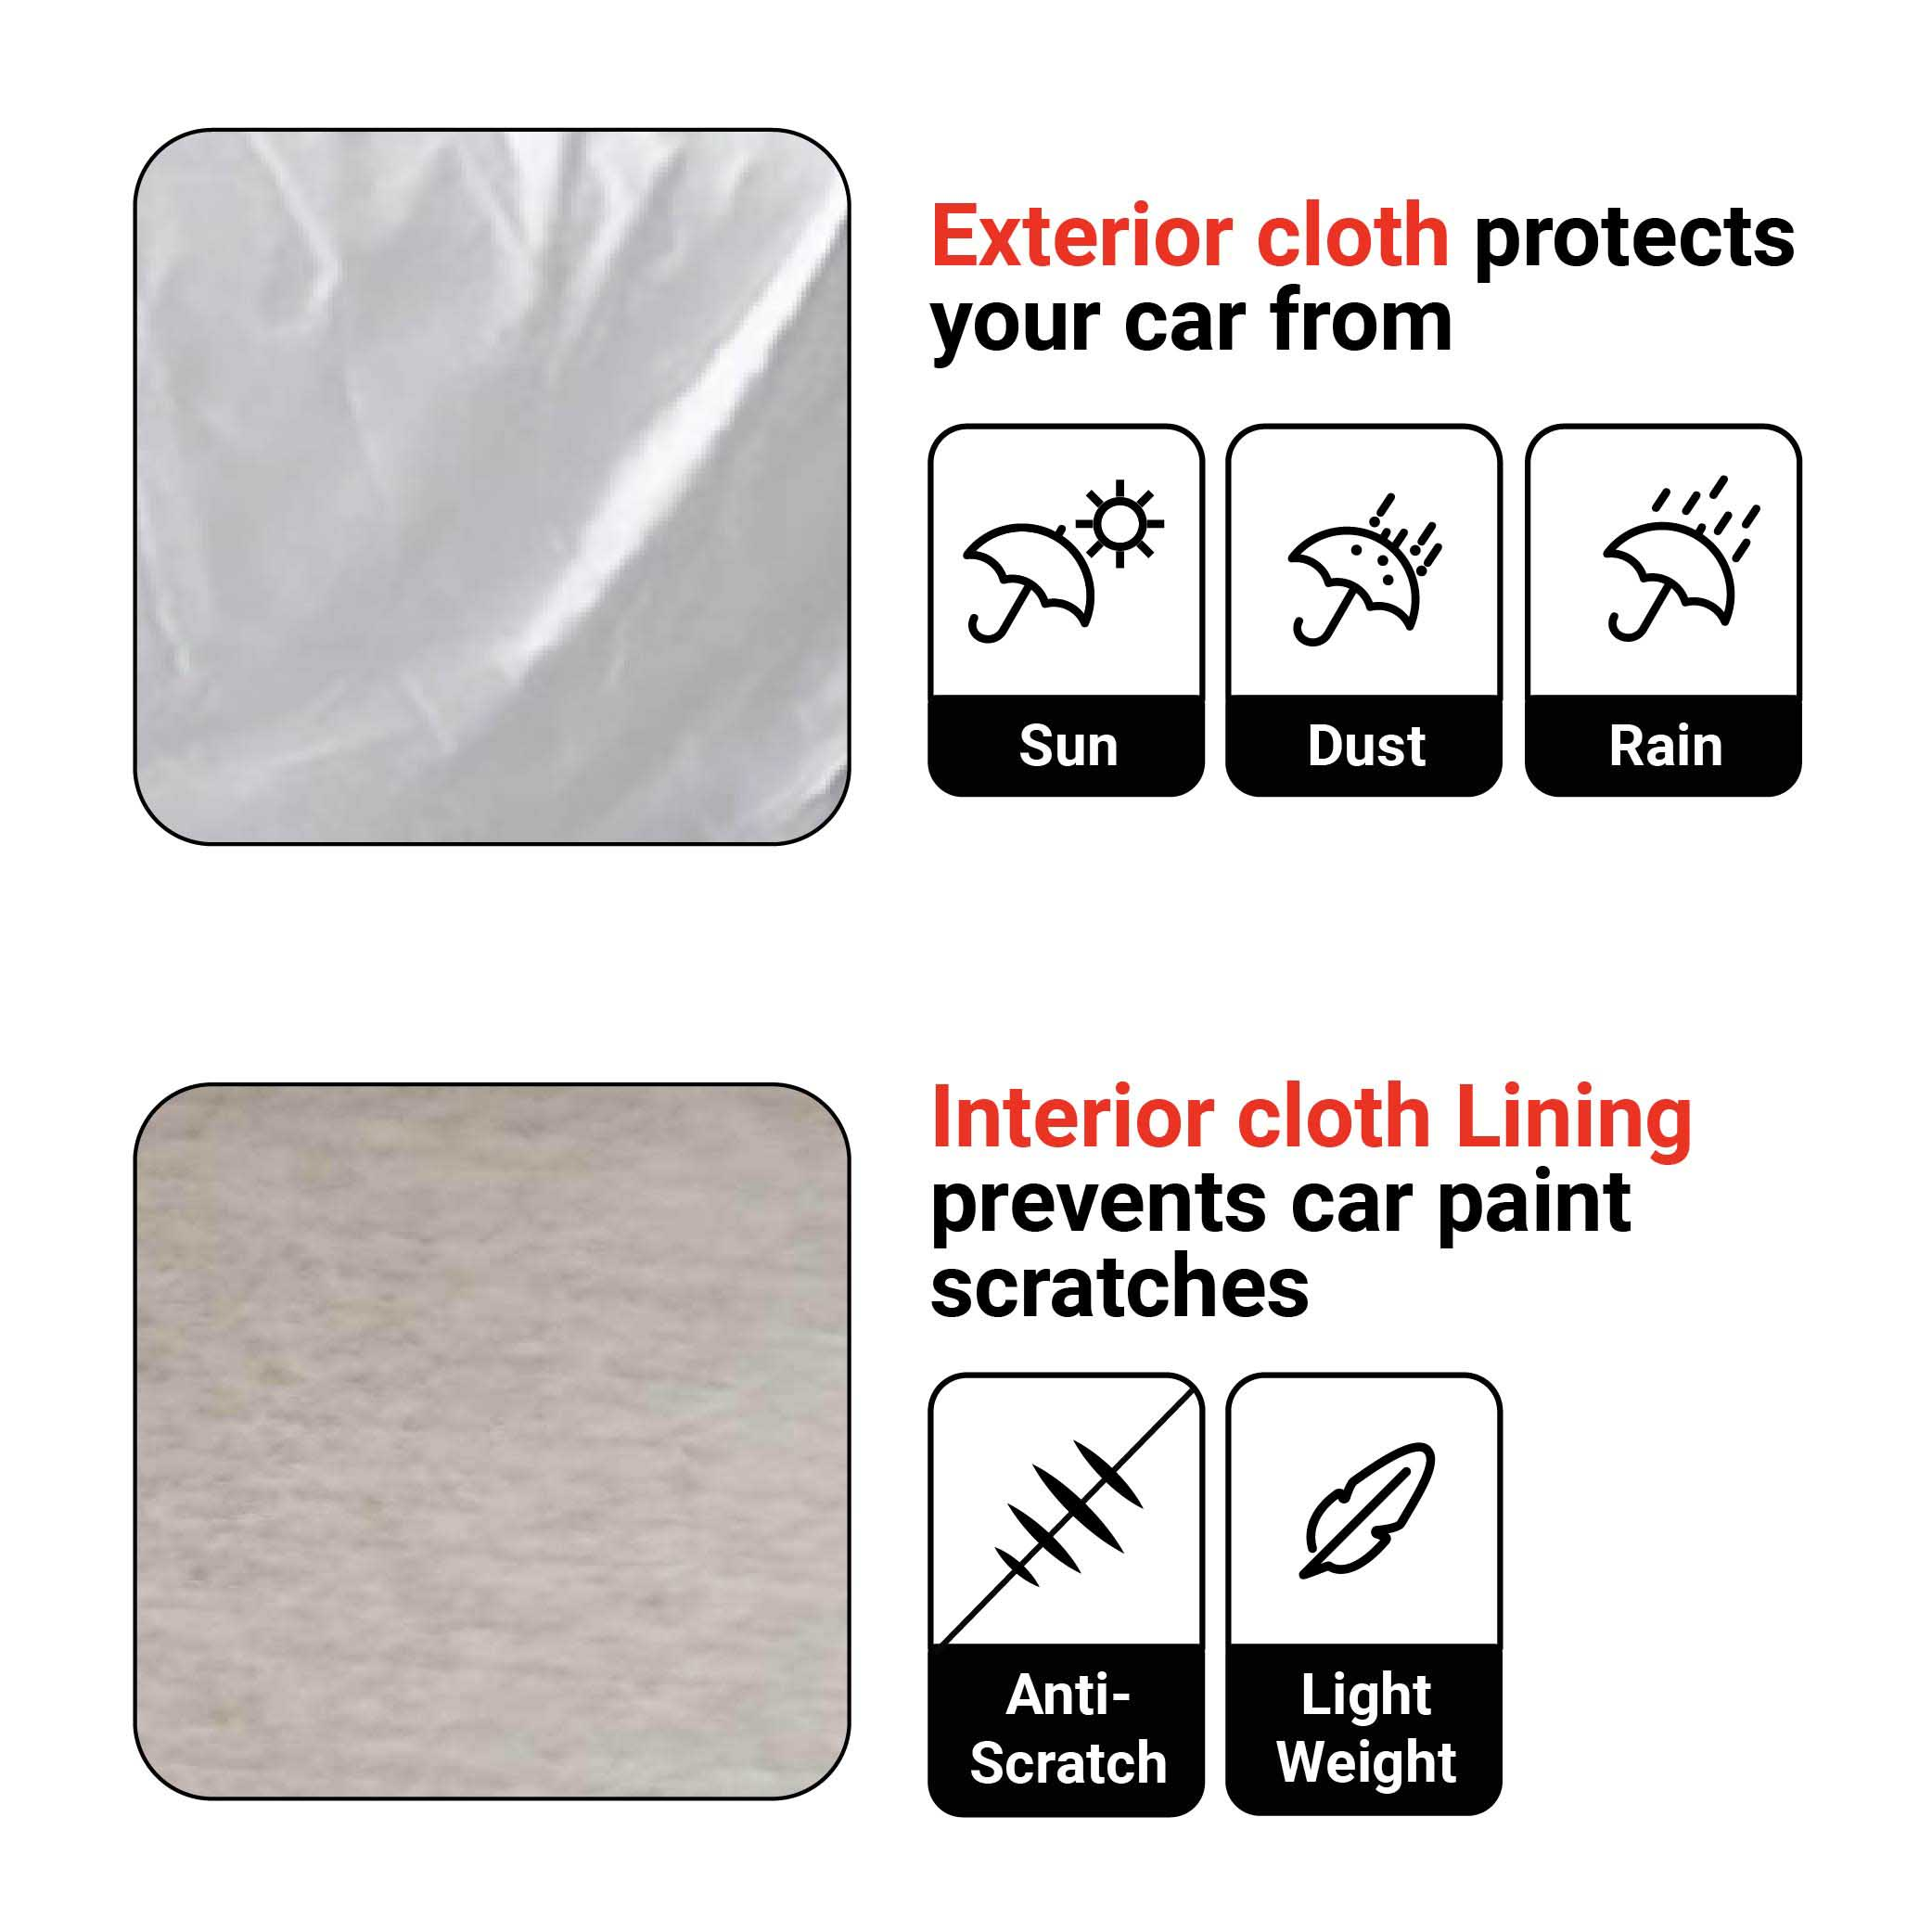 Polco TATA Altroz Car Body Cover with Antenna Cover, Mirror Pockets and 100% Water Repellent (Dupont Tyvek)